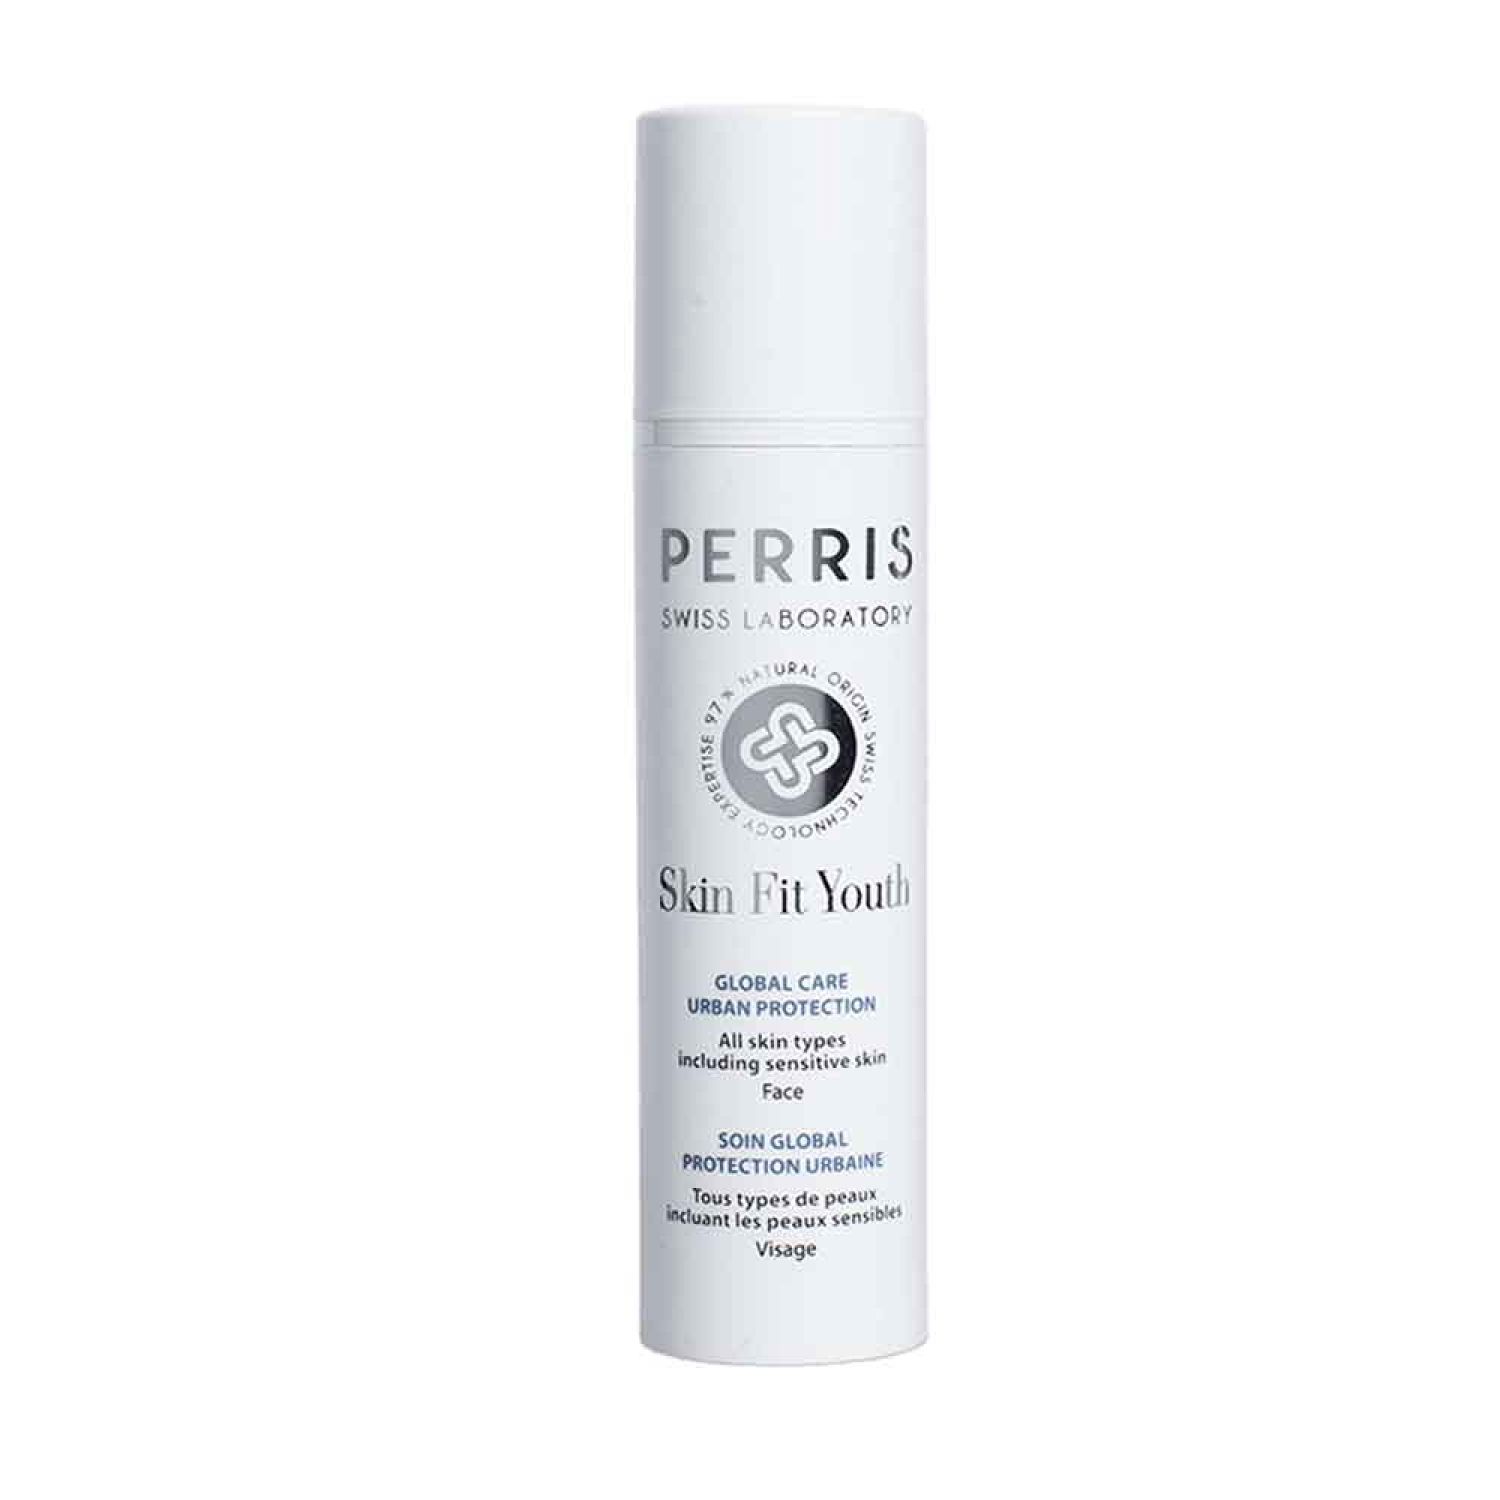 Perris Swiss Laboratory Skin Fitness Skin Fit Youth Urban Protection Global Care